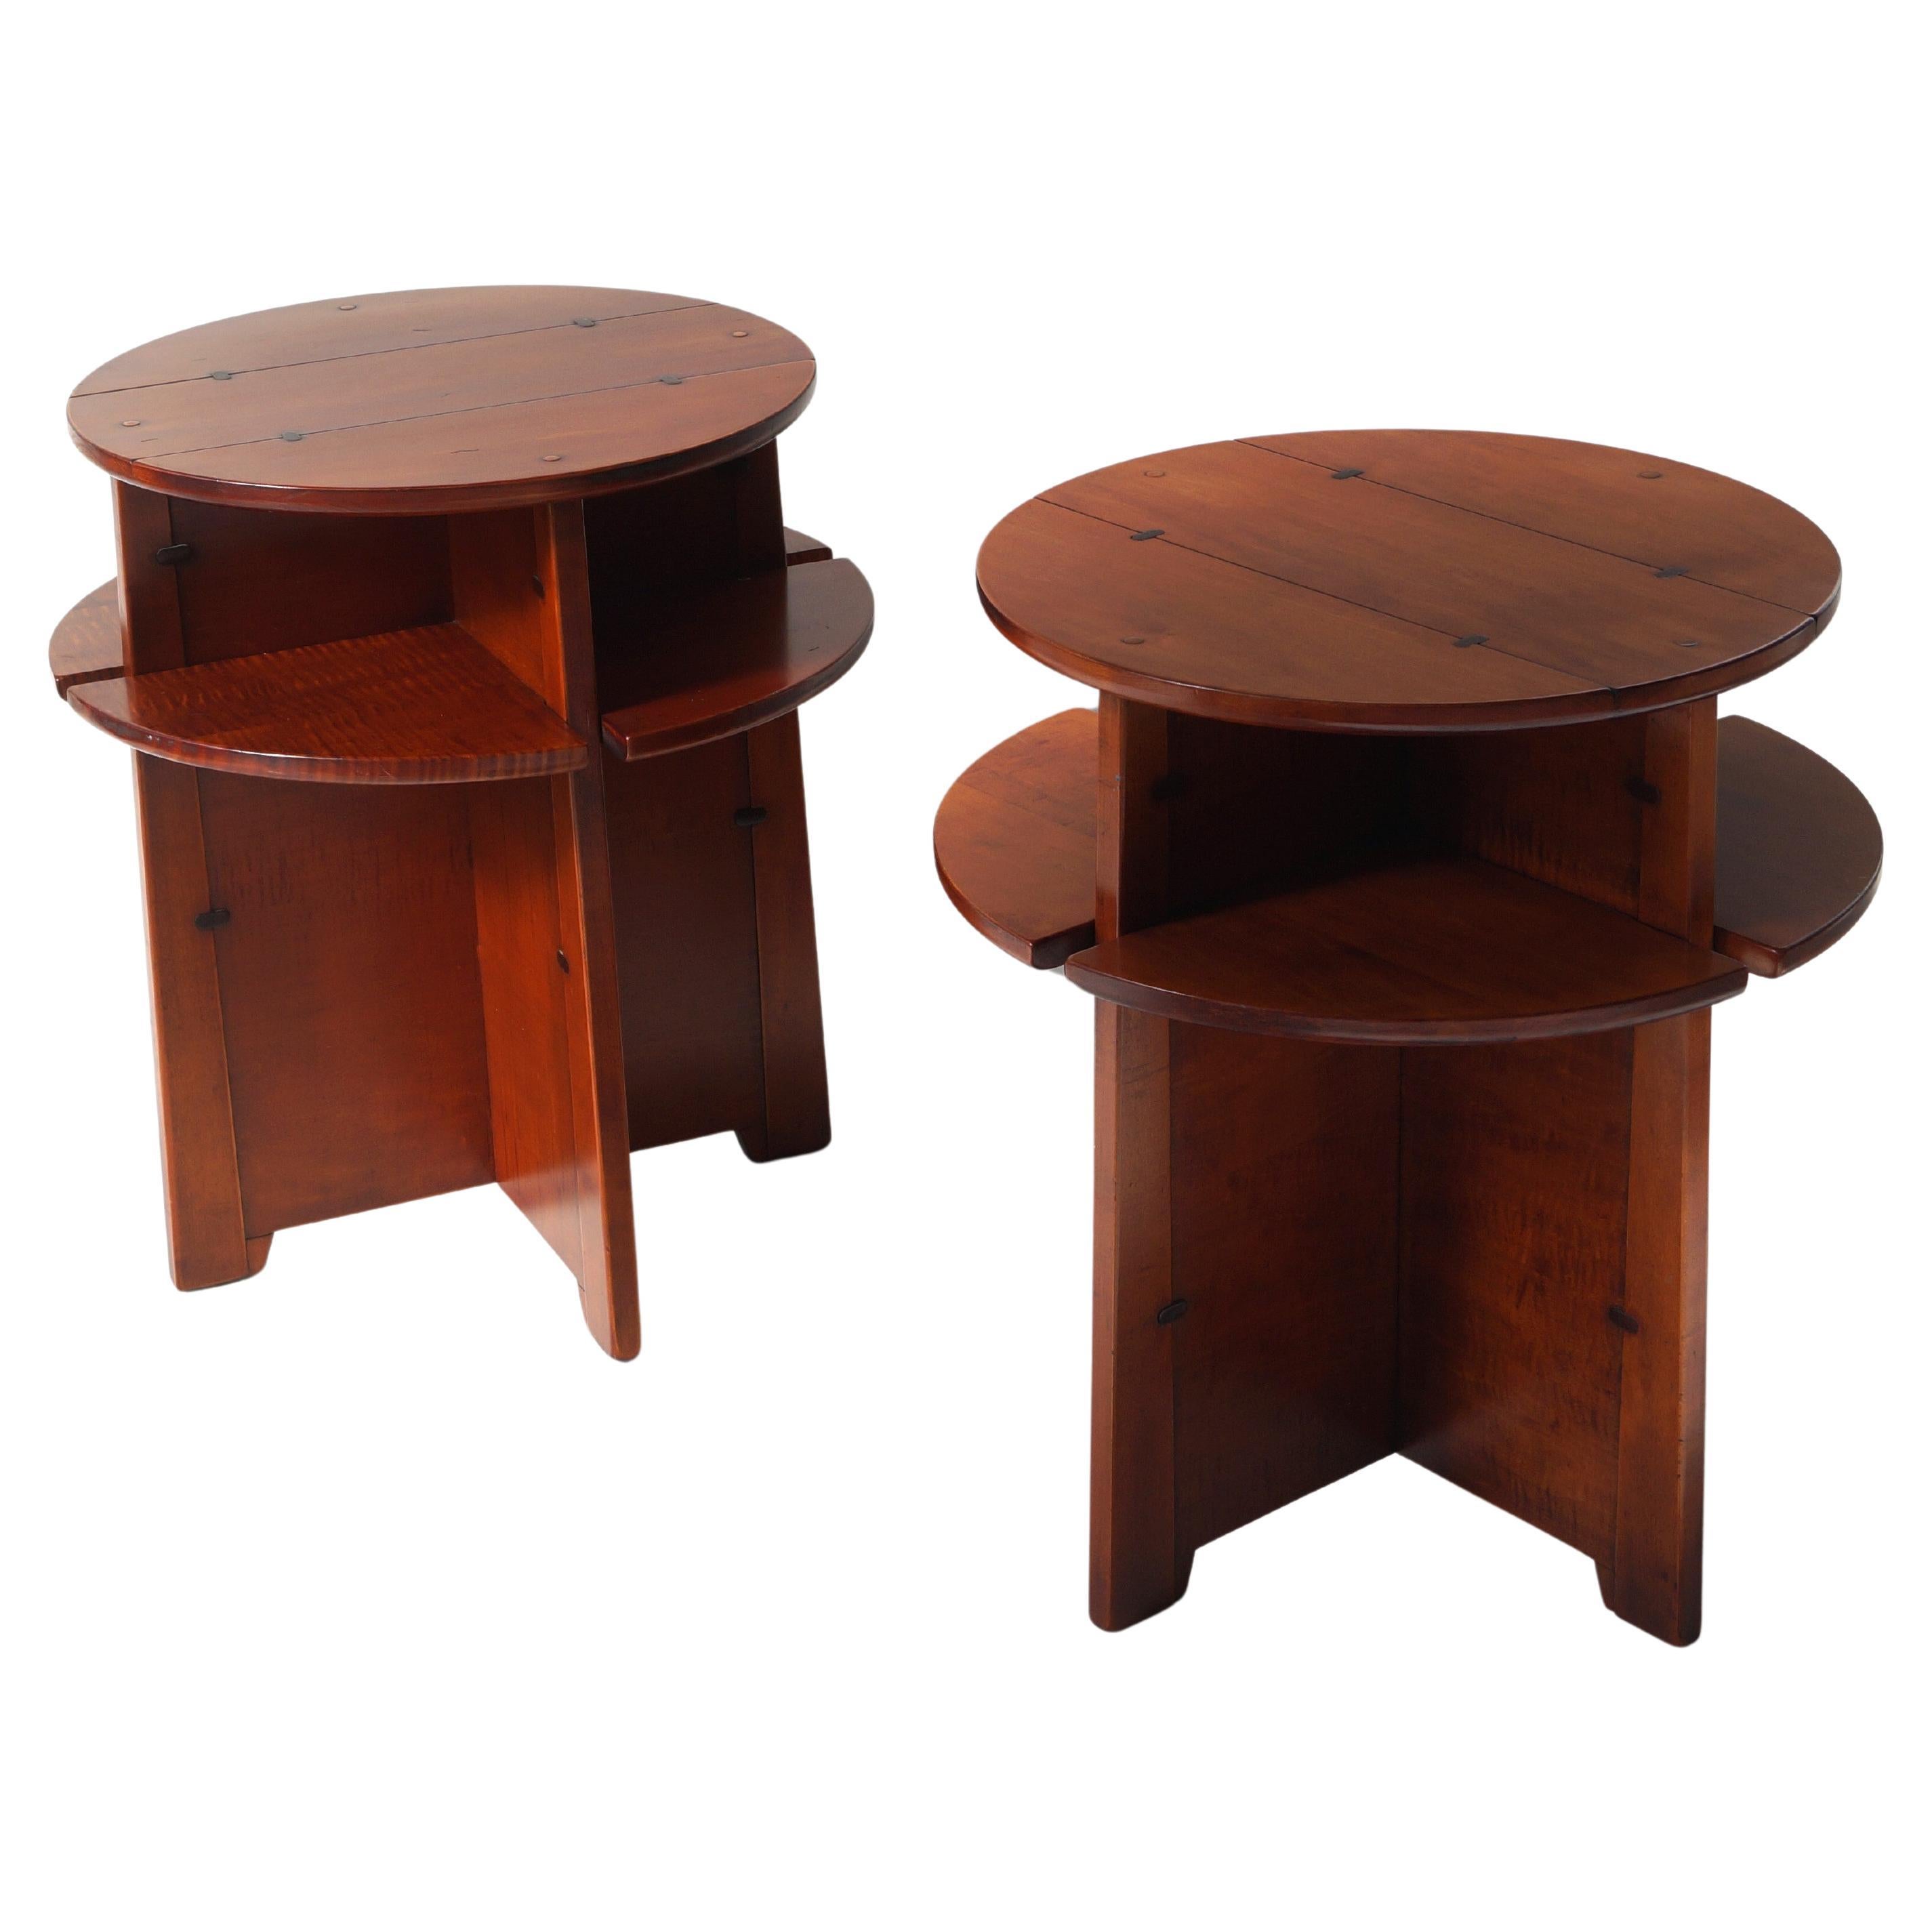 What size should a side table be?